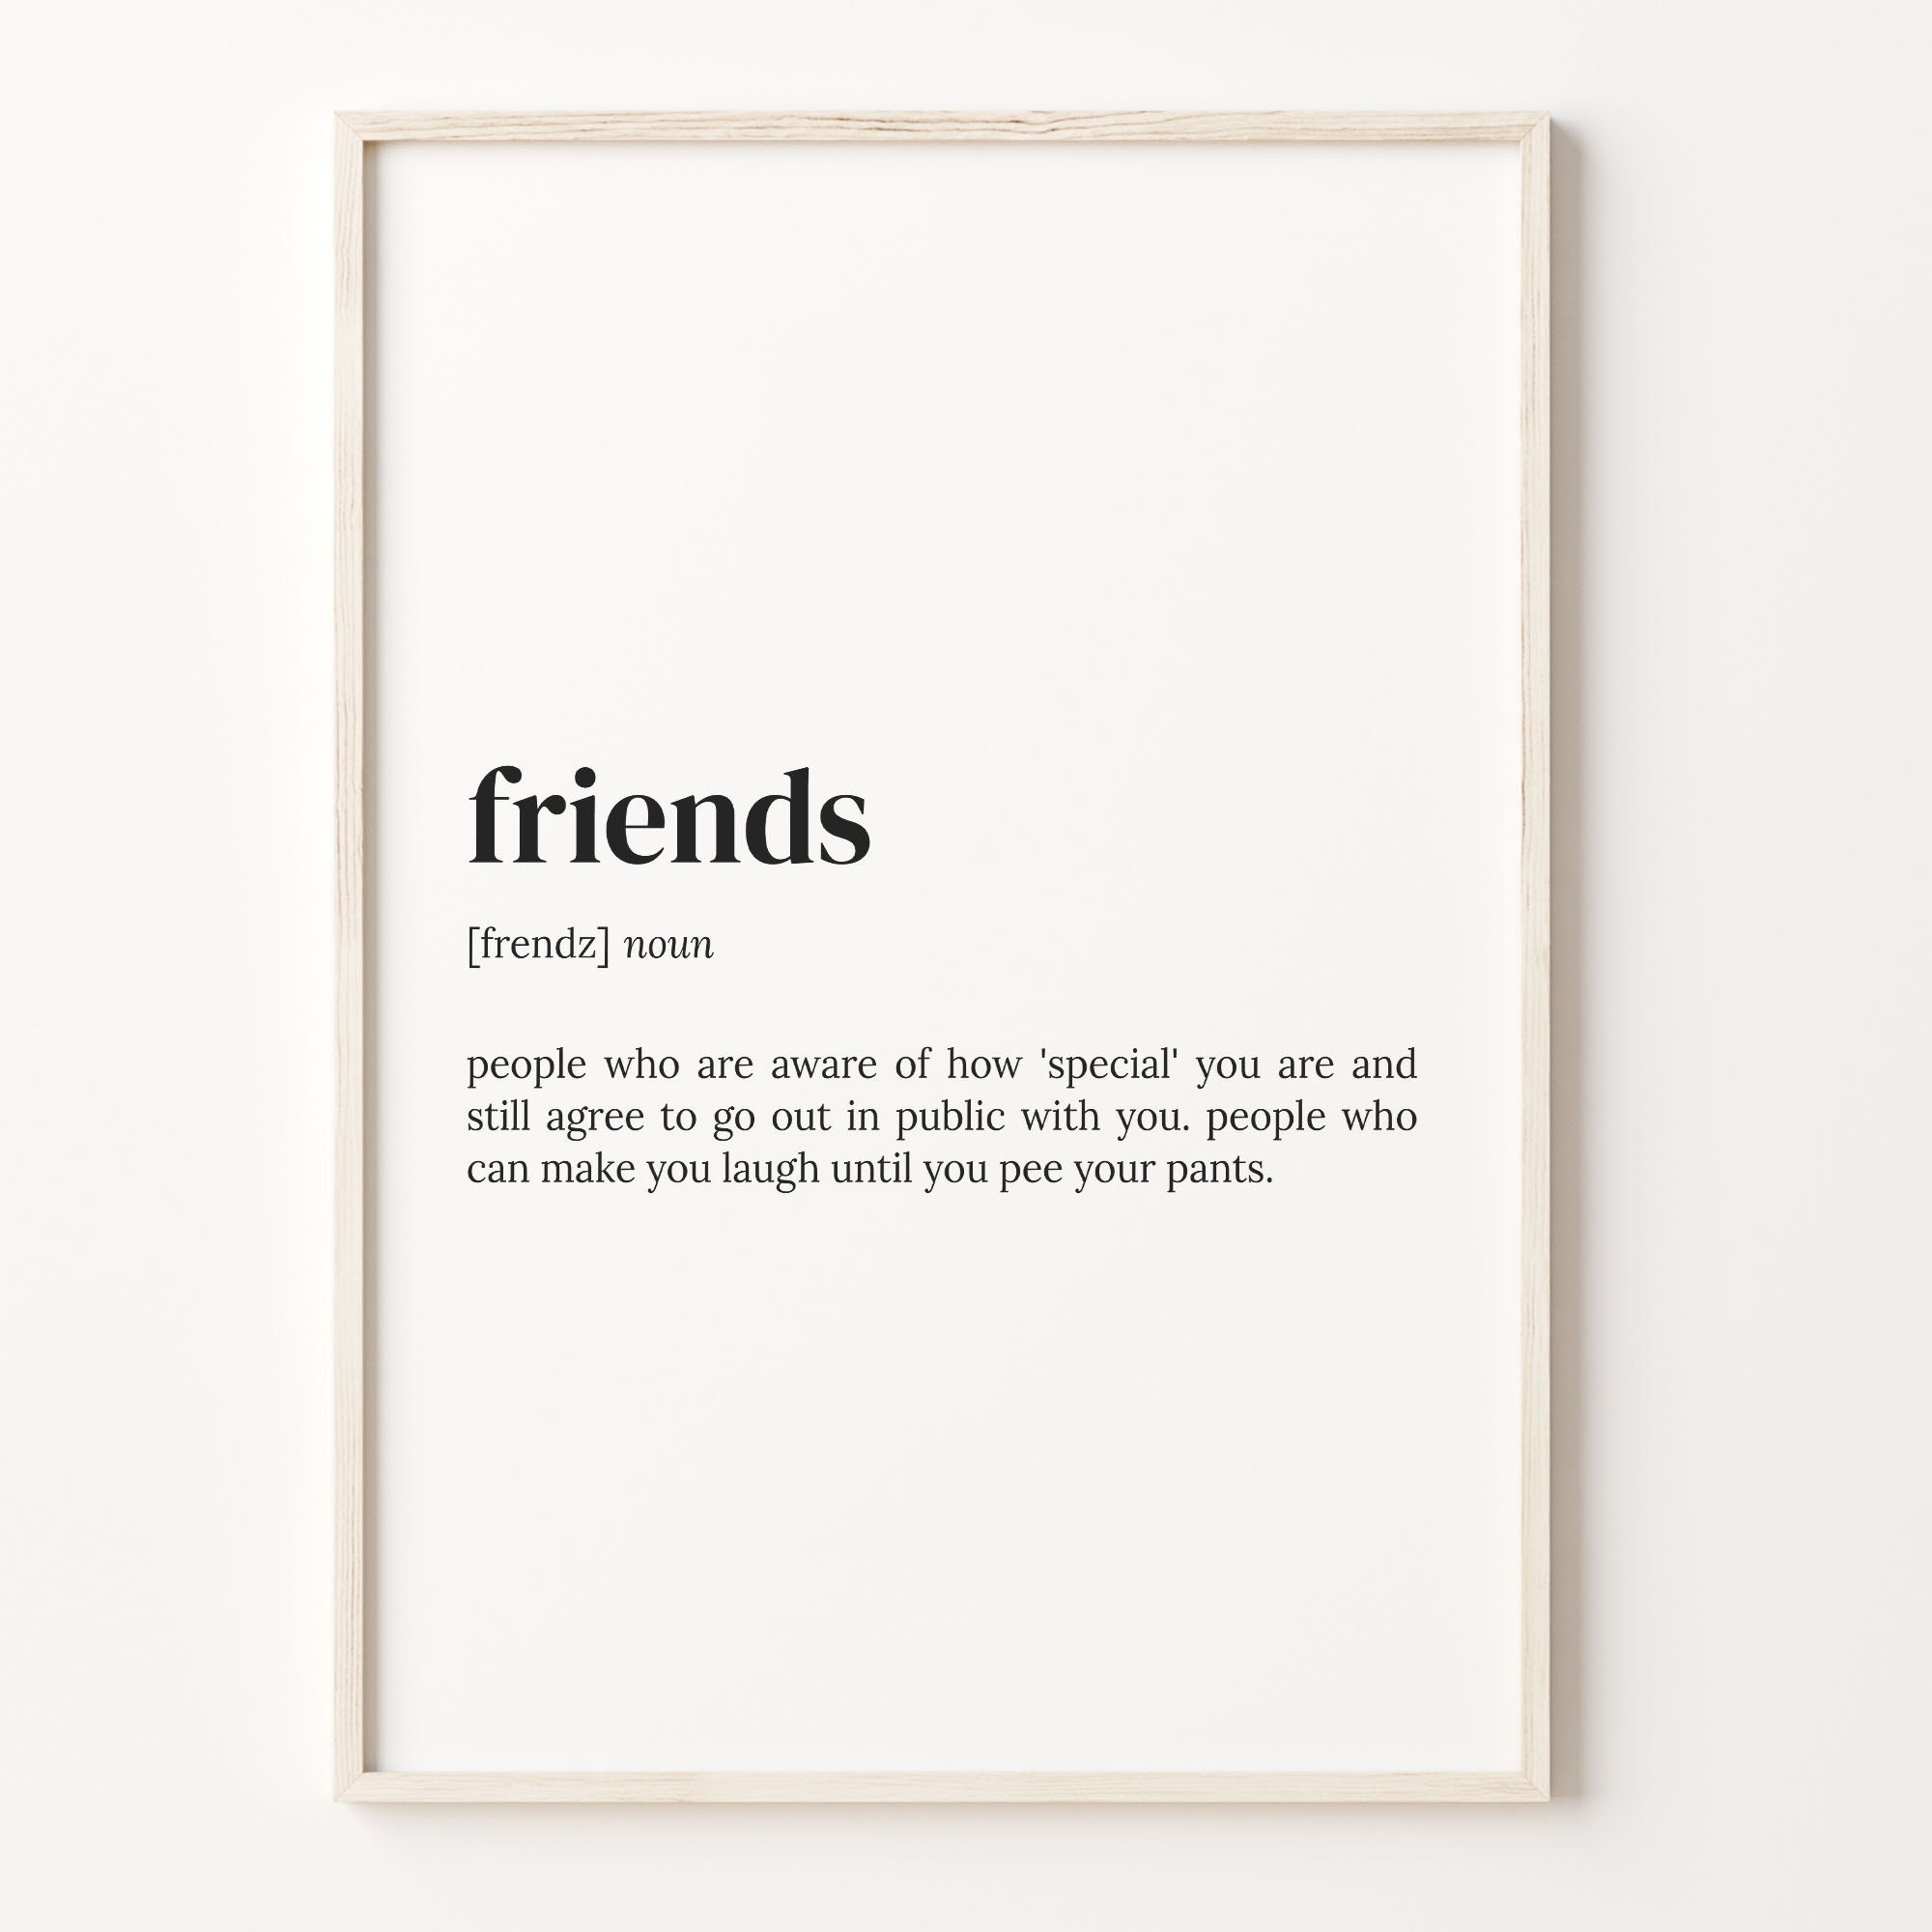 Friends TV Show Sign, Friends Quotes Plaque Gifts Funny Wall Decor PIVOT!  517